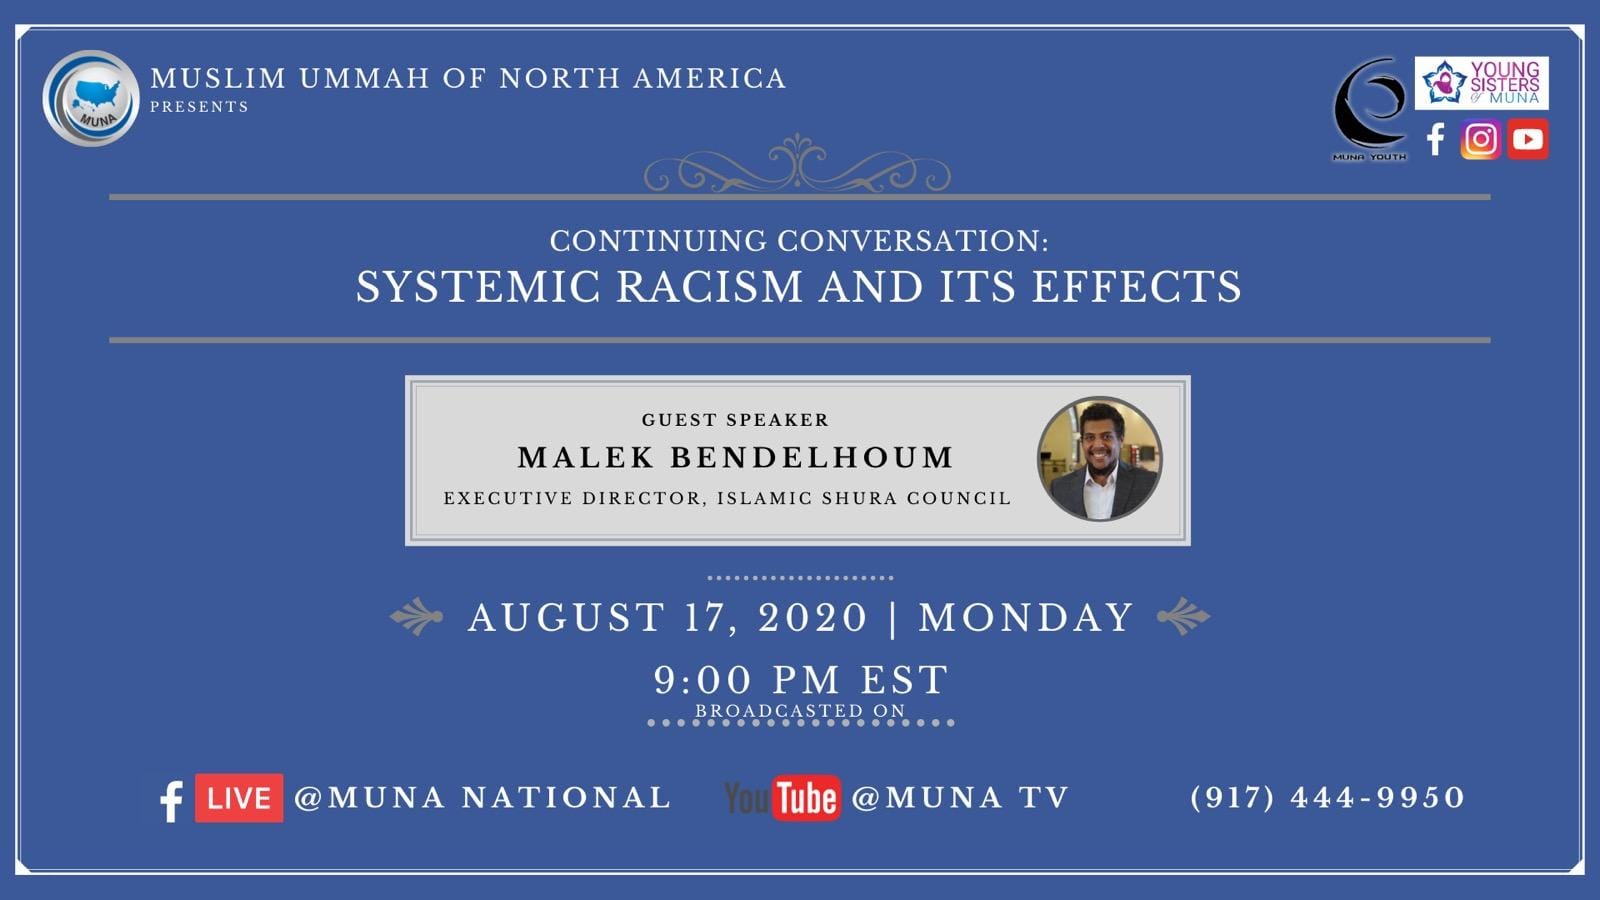 Topic – Continuing Conversation: Systemic Racism and Its Effects